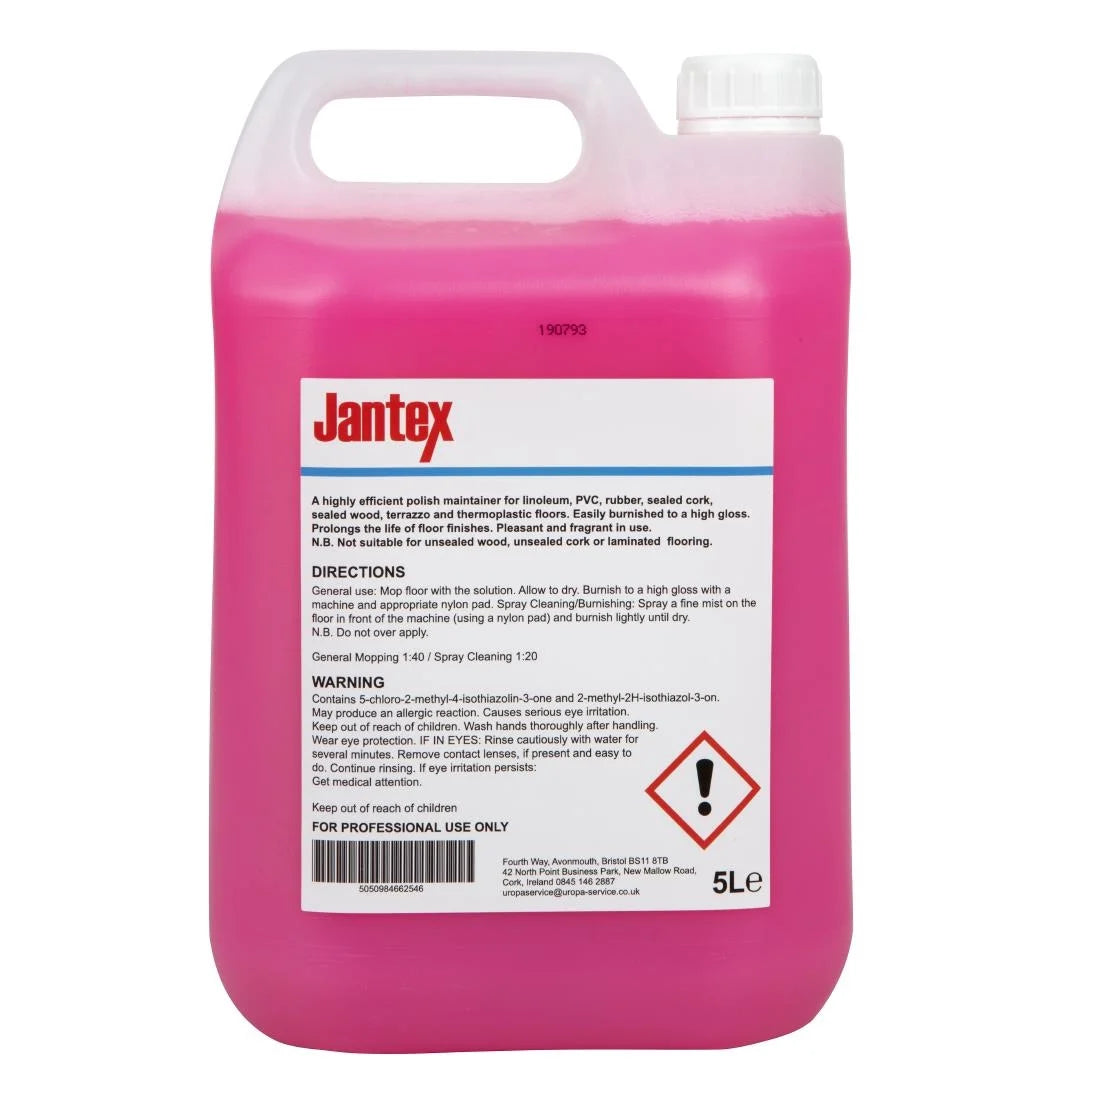 Jantex Floor Cleaner and Maintainer Concentrate 5Ltr JD Catering Equipment Solutions Ltd